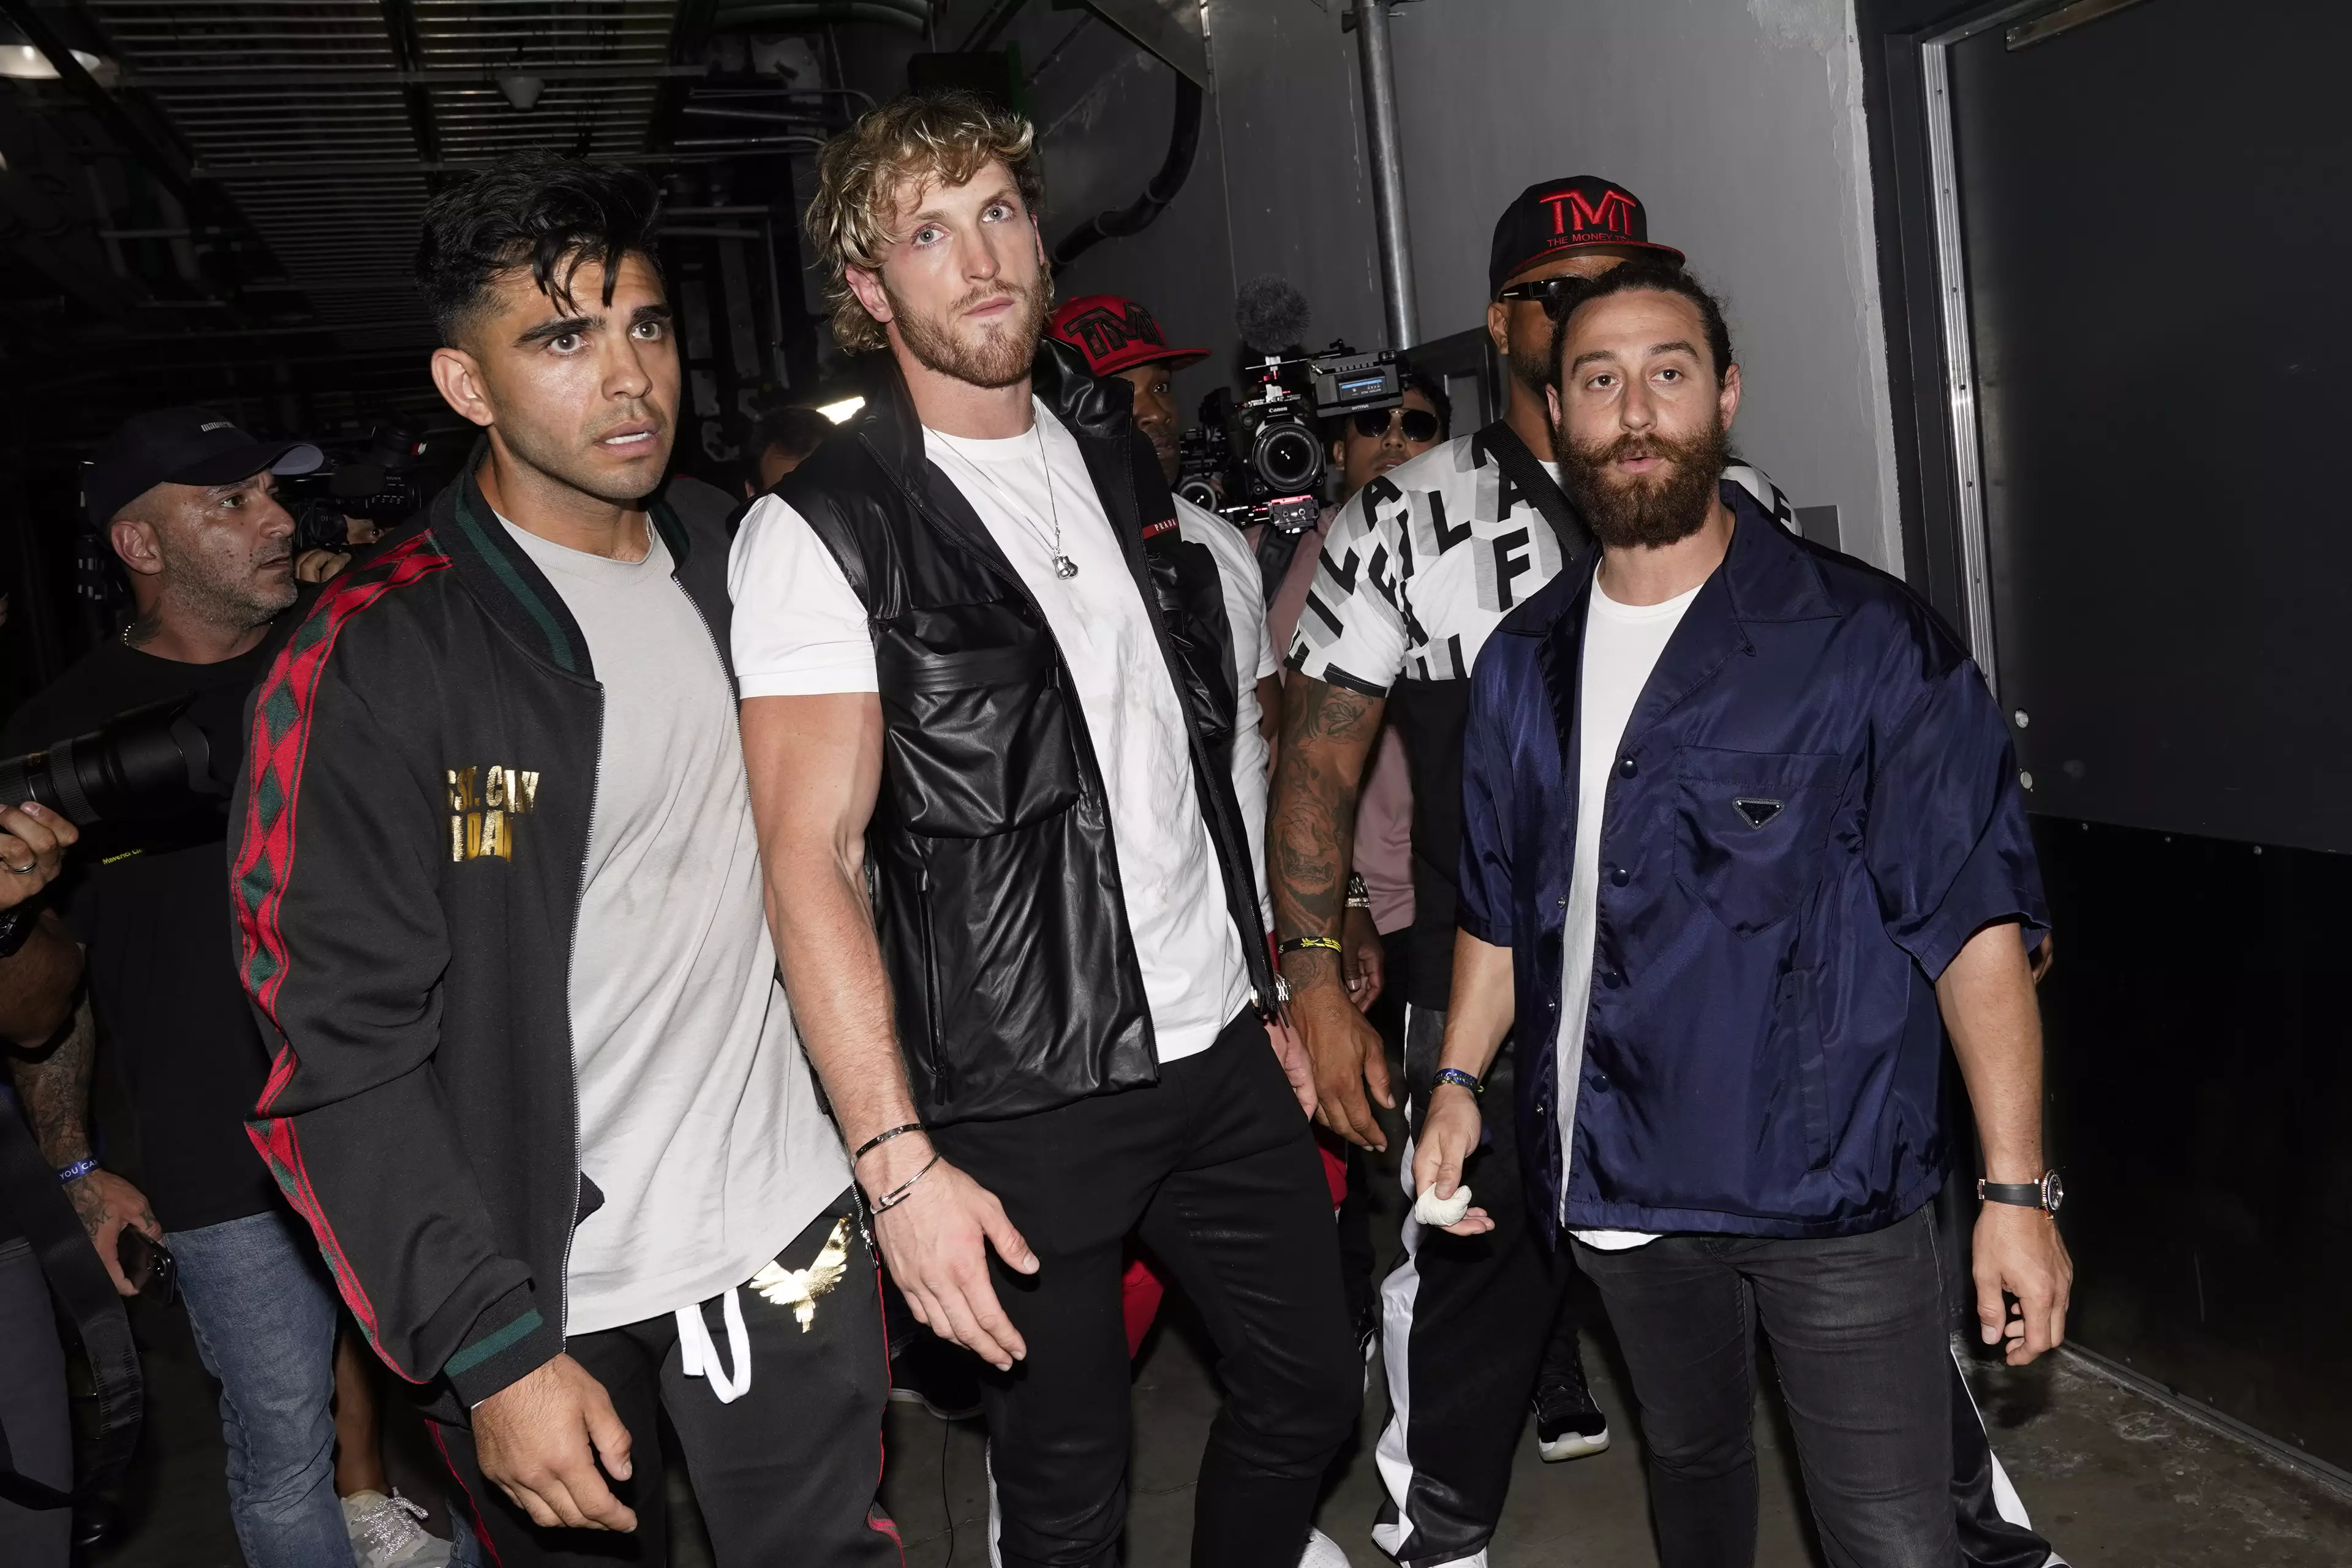 Logan Paul is held back by his team after Mayweather and Jake Paul's (not pictured) brawl. (Image